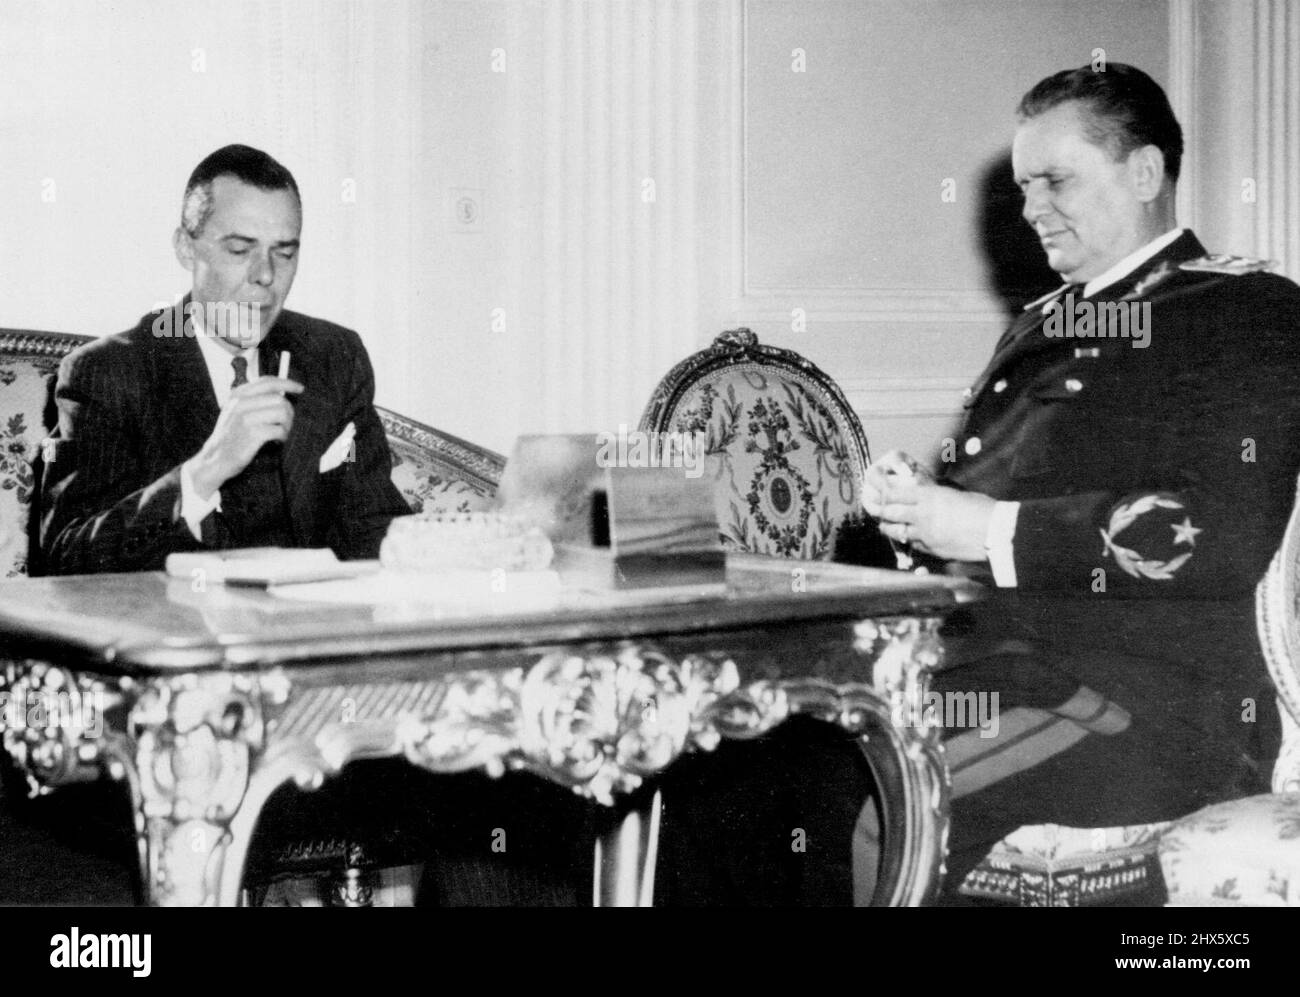 Tito Receives New U.S. EnvoyYugoslav premier Marshal Josip Broz Tito (right) receives George Allen, new United States ambassador to Yugoslavia in Belgrade, Jan. 26. According to ambassador Allen the two had a long discussion on the'general field of American-Yugoslav relations' and the conversation was 'marked by friendliness and frankness on both sides.' January 2, 1950. (Photo by Associated Press Photo). Stock Photo